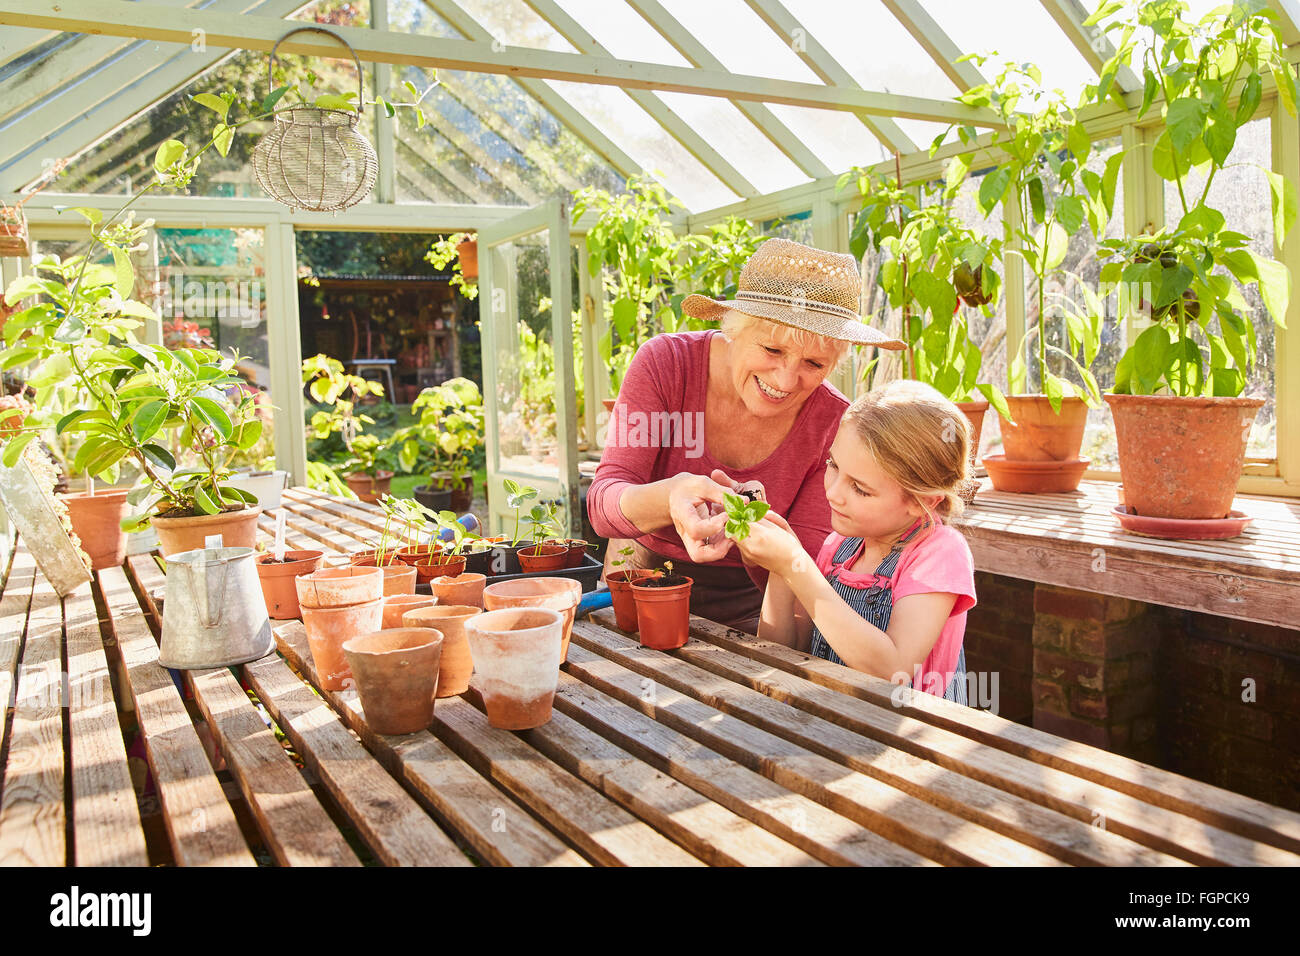 Grandmother and granddaughter potting plants in greenhouse Stock Photo